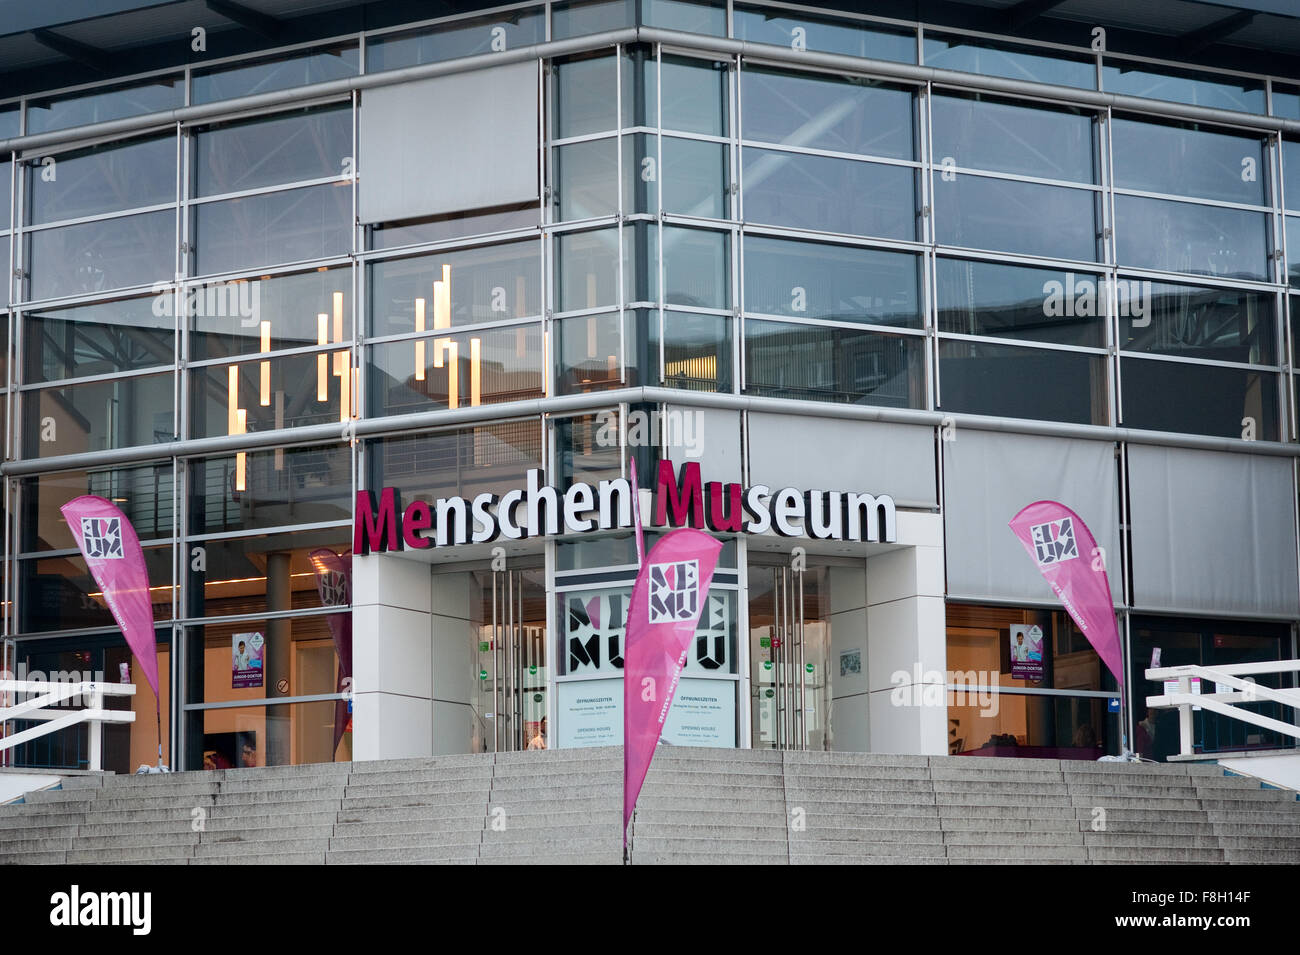 Berlin, Germany. 09th Dec, 2015. The entrance to the Menschen Museum underneath the television tower in Berlin, Germany, 09 December 2015. The Higher Administrative Court of Berlin will negotiate a revision on 10 December 2015 after the Administrative Court had allowed the opening of Body Worlds Museum earlier this year. Photo: KLAUS DIETMAR GABBERT/DPA/Alamy Live News Stock Photo